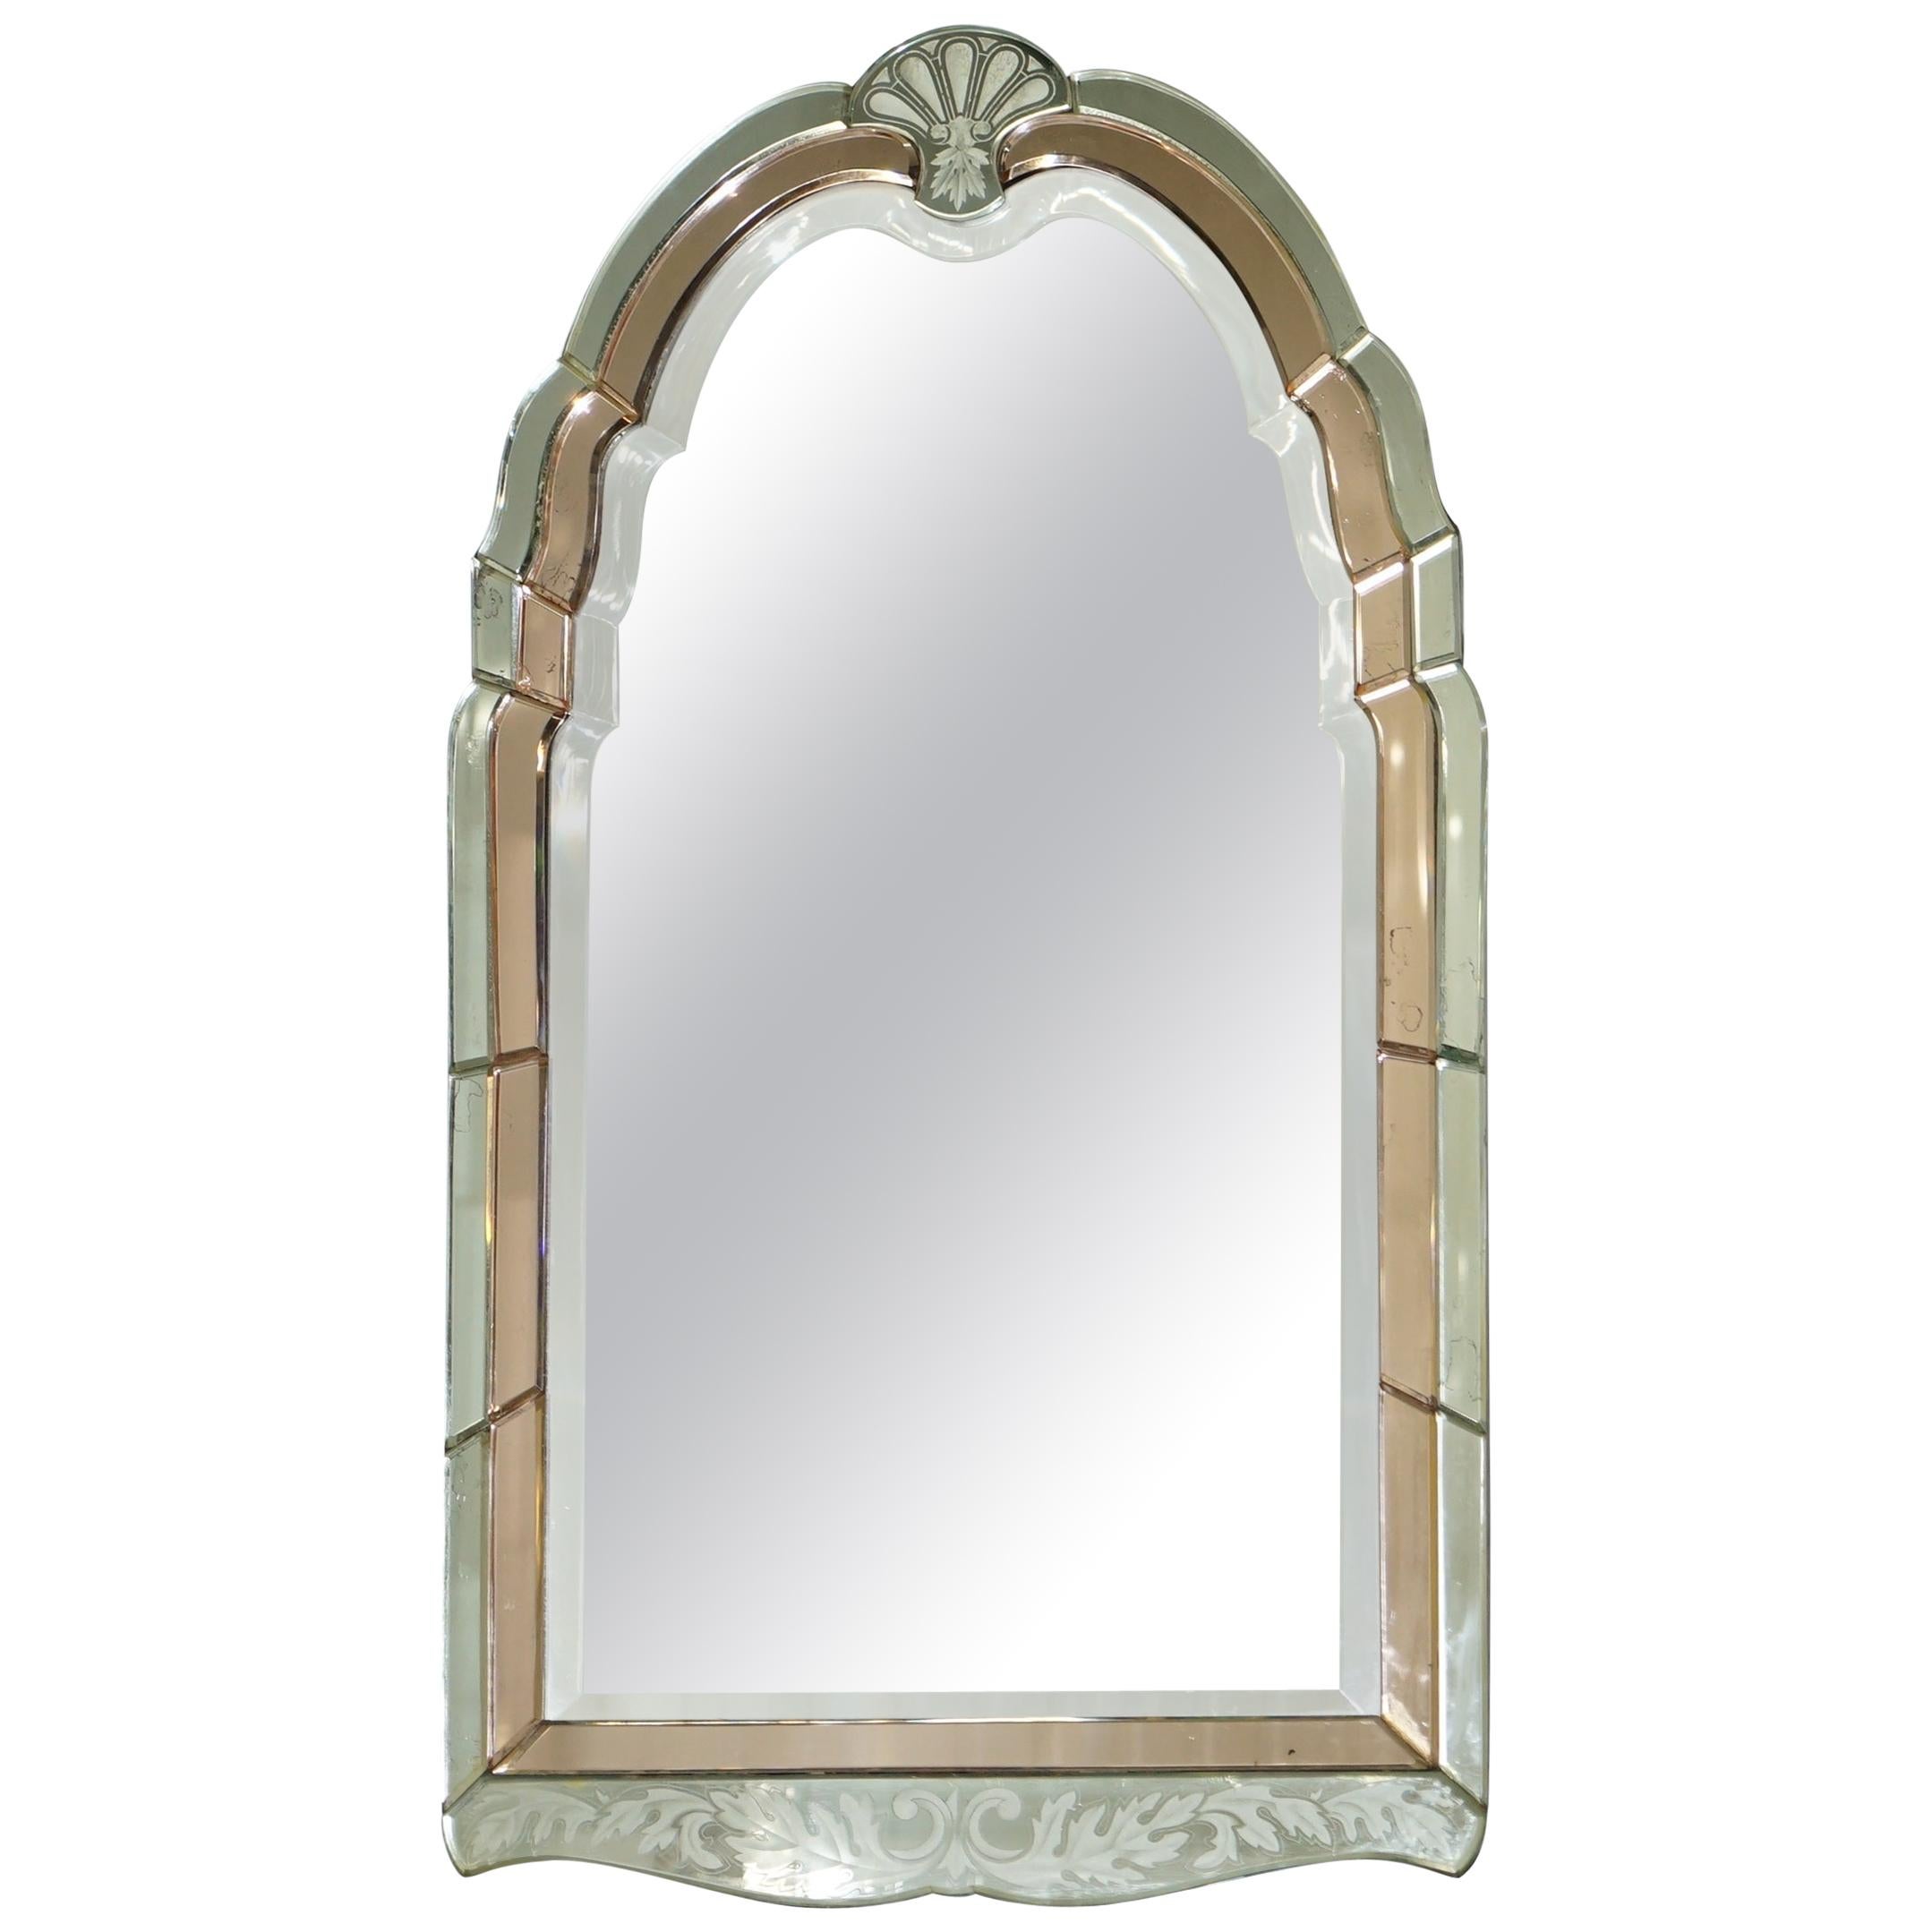 Lovely 1930s Peach French Art Deco Venetian Etched and Engraved Bevelled Mirror